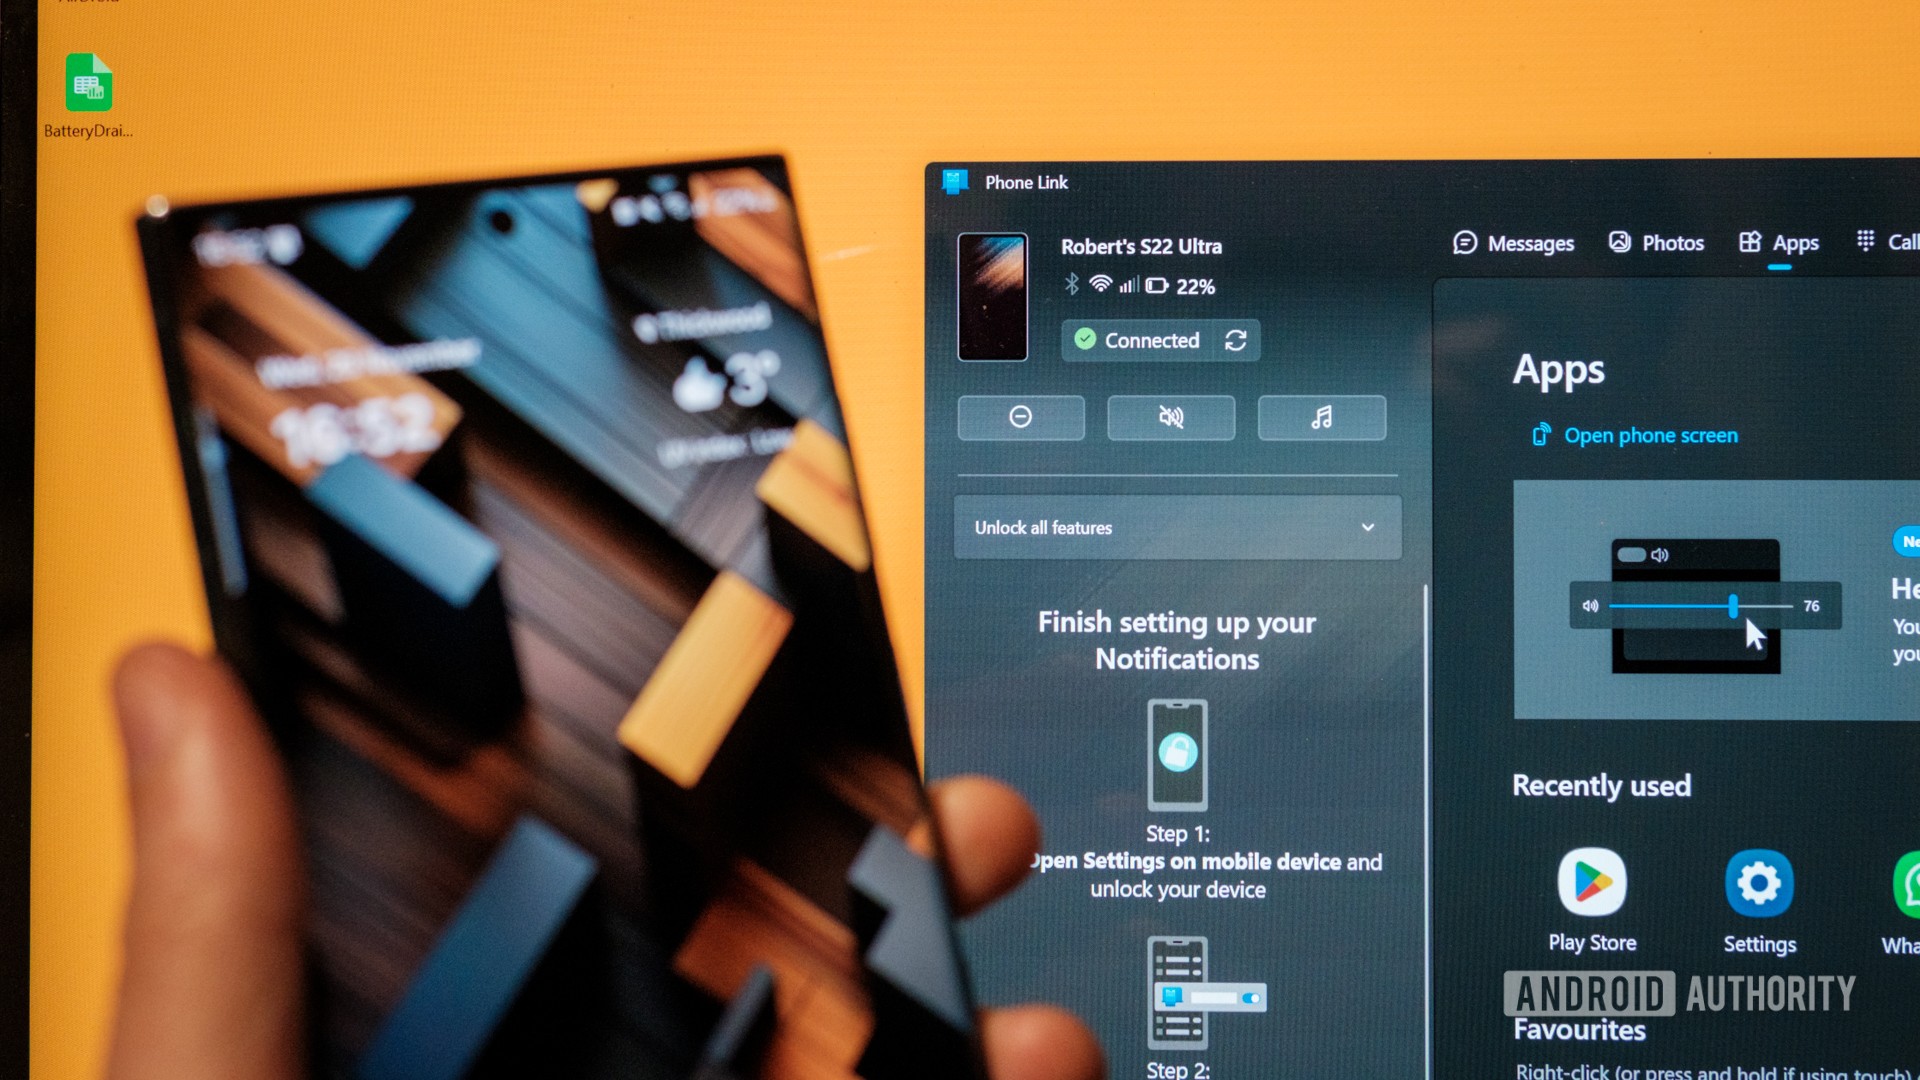 androidauthority.com - Matt Horne - Wireless Android phone access from Windows File Explorer begins roll-out